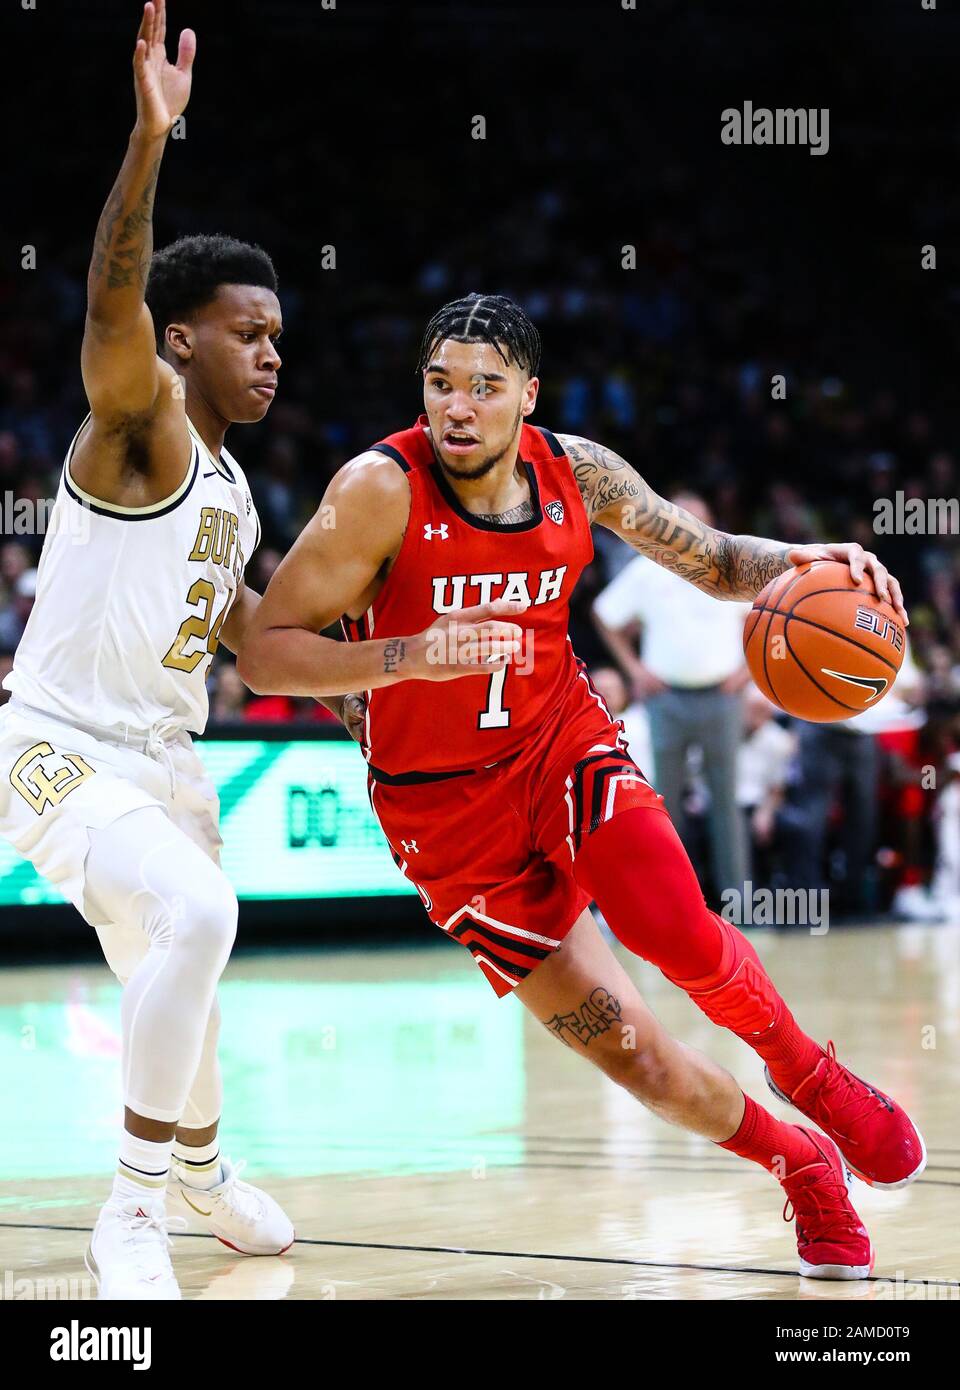 January 12, 2020: Utah Utes forward Timmy Allen (1) drives against Colorado Buffaloes guard Eli Parquet (24) in the men's basketball game between Colorado and Utah at the Coors Events Center in Boulder, CO. Colorado raced out to a 26-7 lead in the first half. Derek Regensburger/CSM. Stock Photo